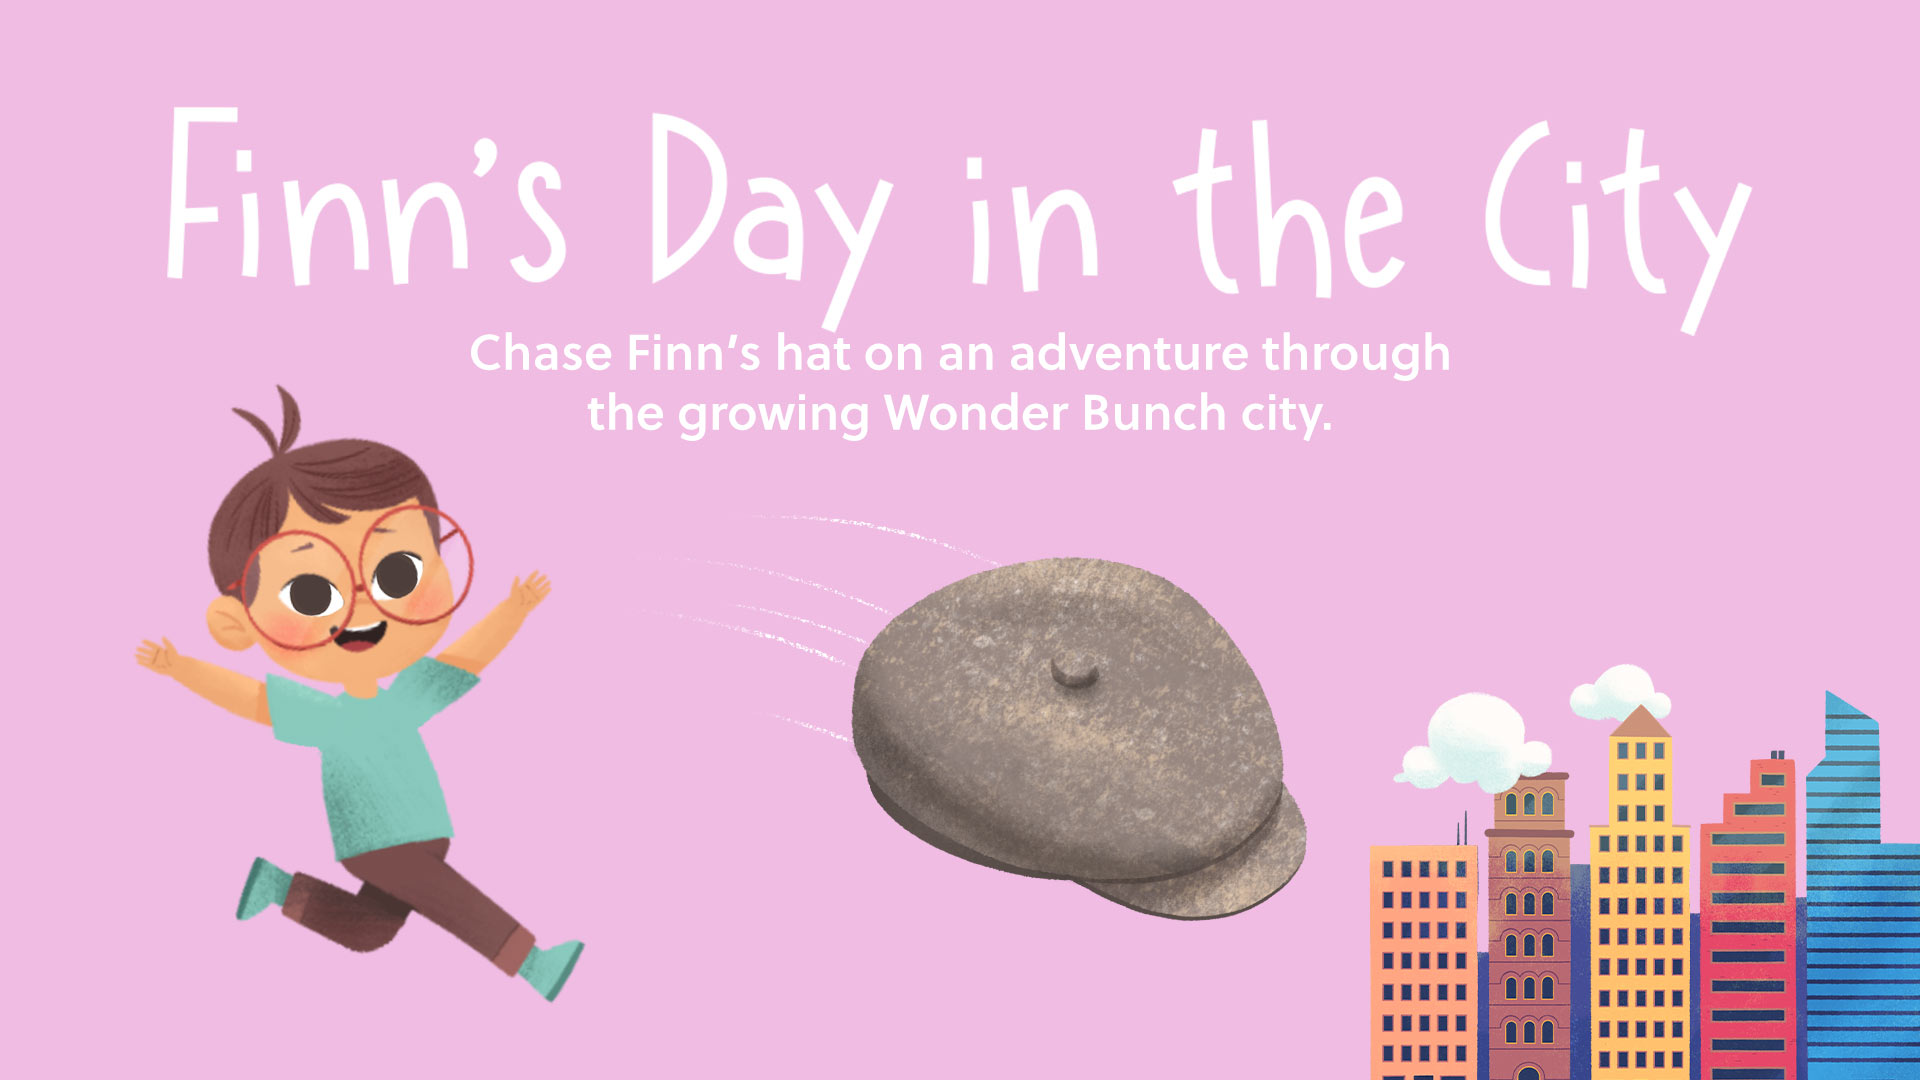 Finn's Day in the City - Chase Finn's hat on an adventure through the growing Wonder Bunch city.